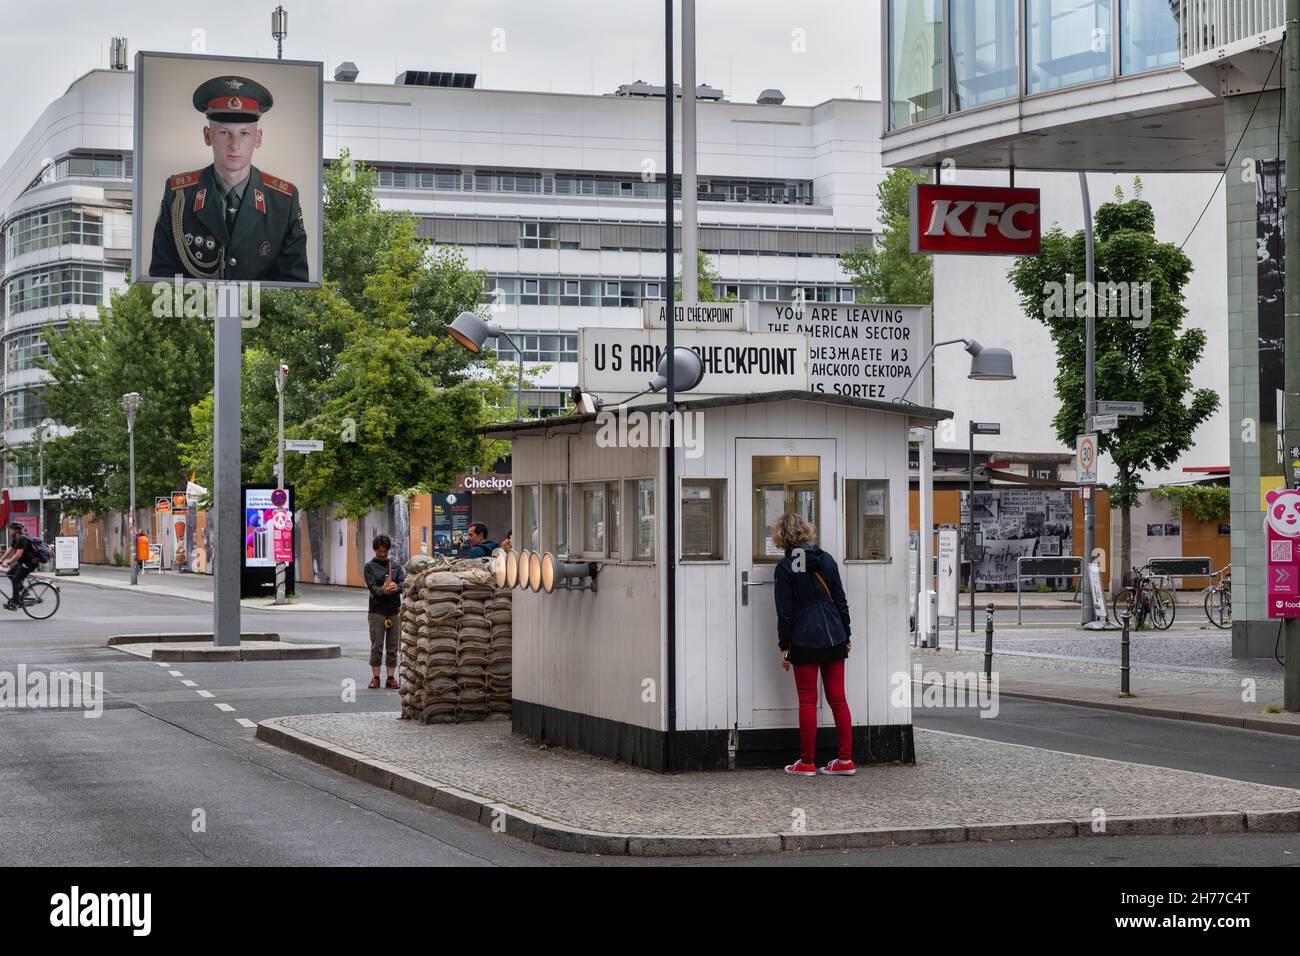 Berlin, Germany, Checkpoint Charlie, US Army Checkpoint at old Berlin Wall crossing point between East and West Berlin, city landmark Stock Photo